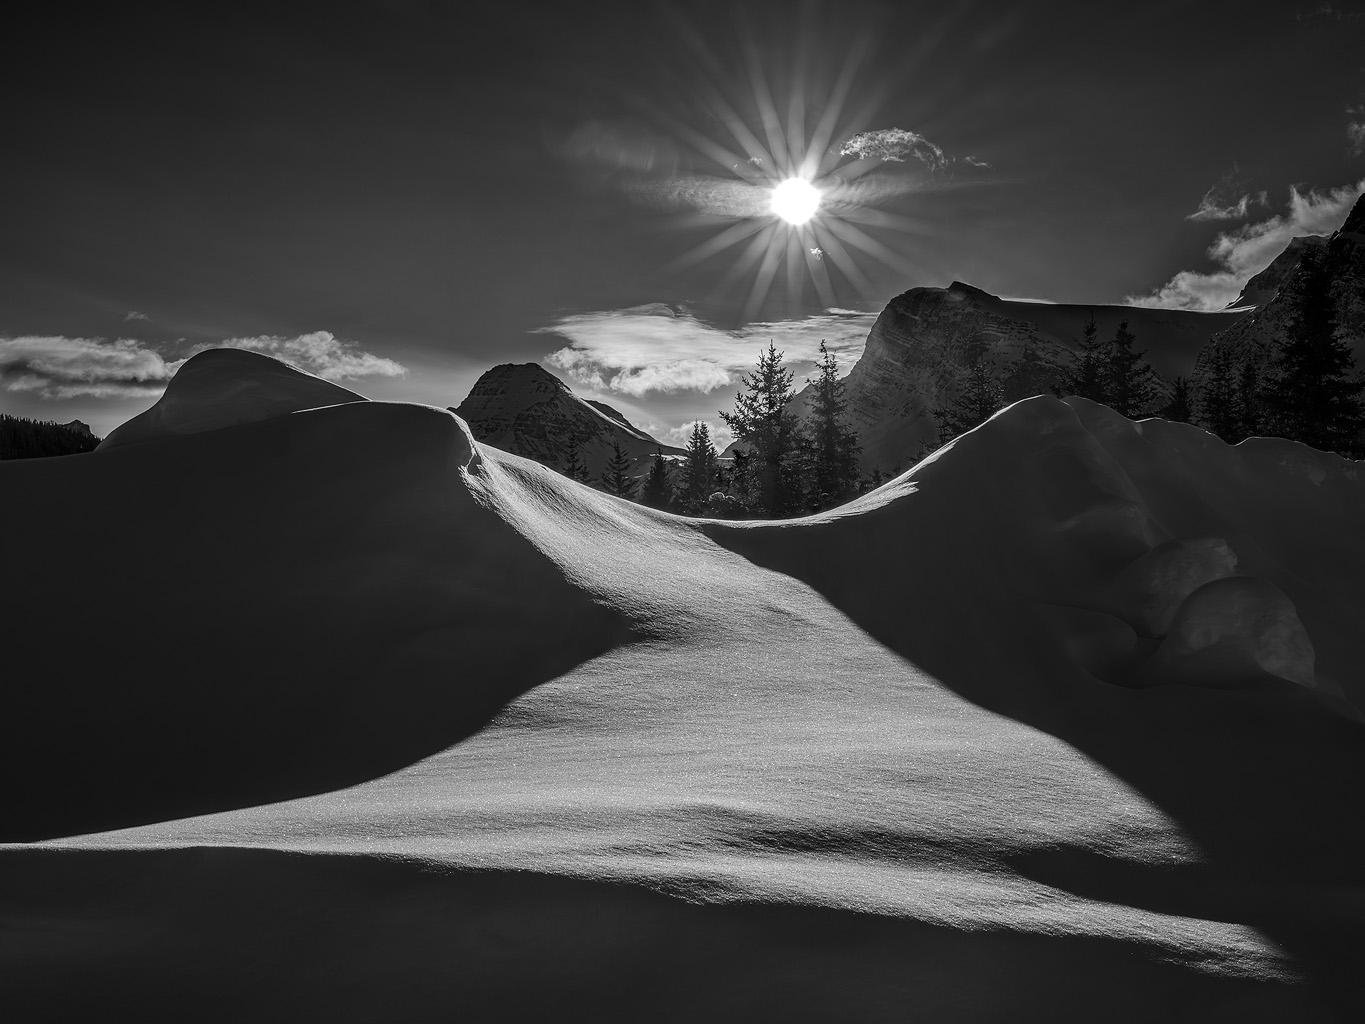 Huachao Sun Black and White Photograph - Characters of Snow #1, Bow Lake, Alberta - black and white photography